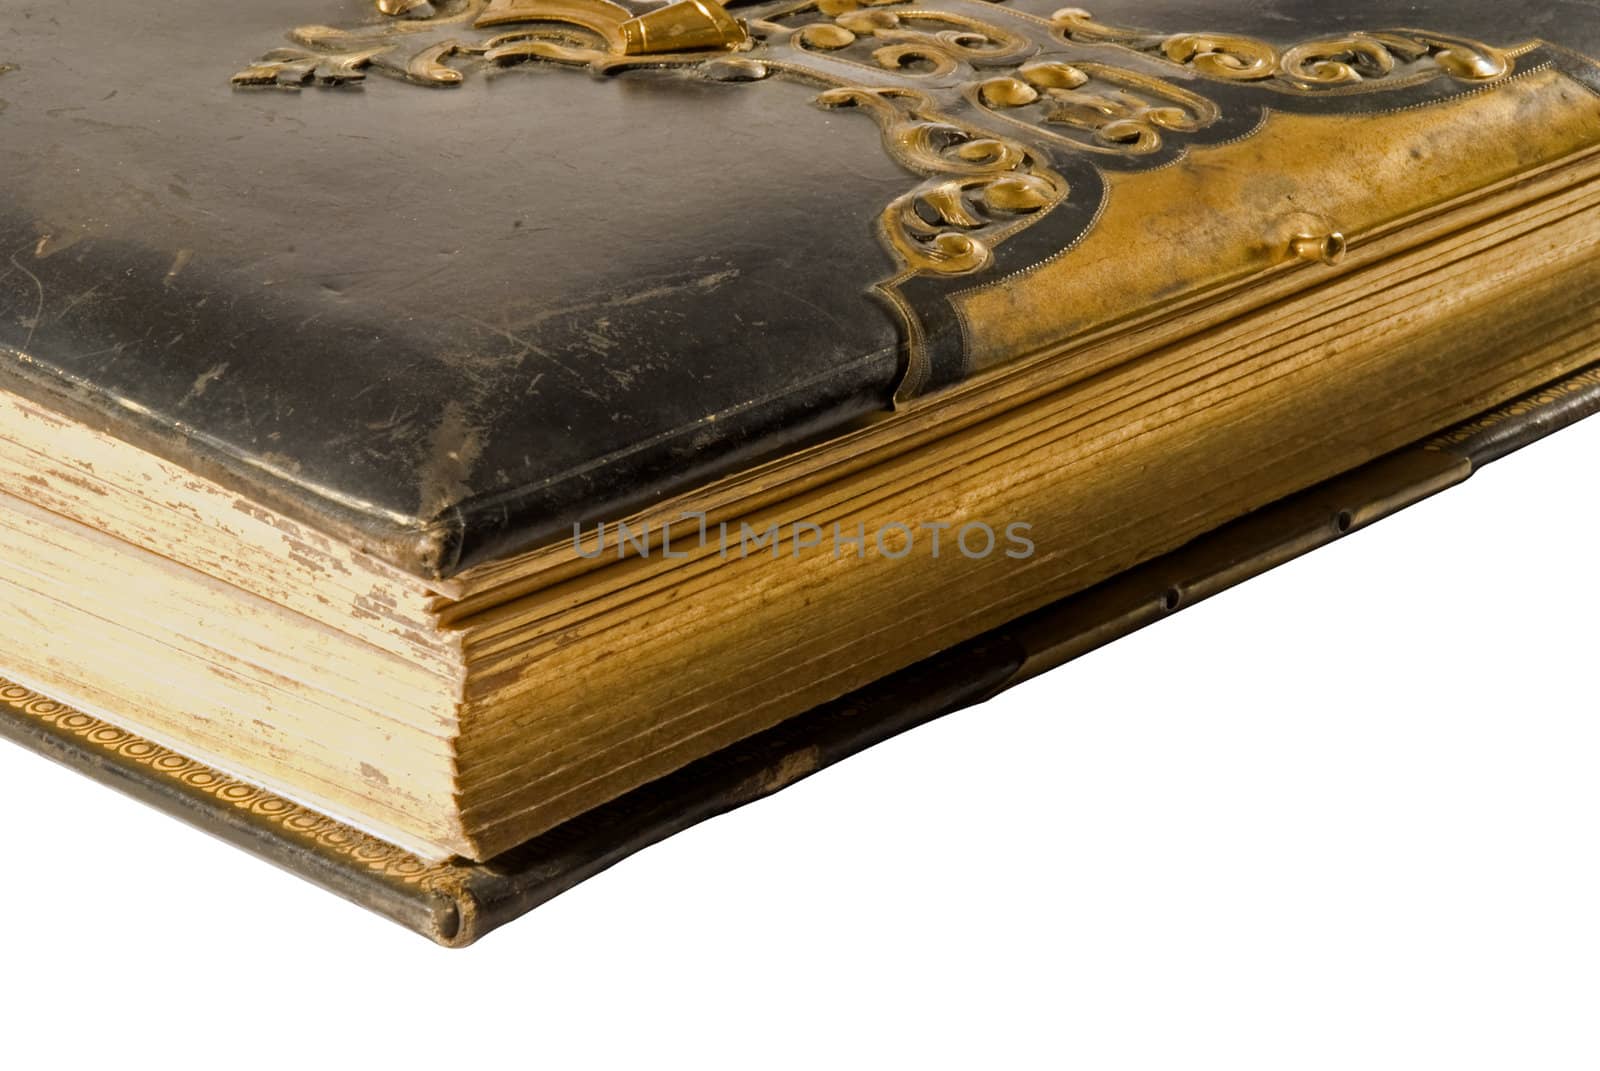 Details of an old book with gilt edge